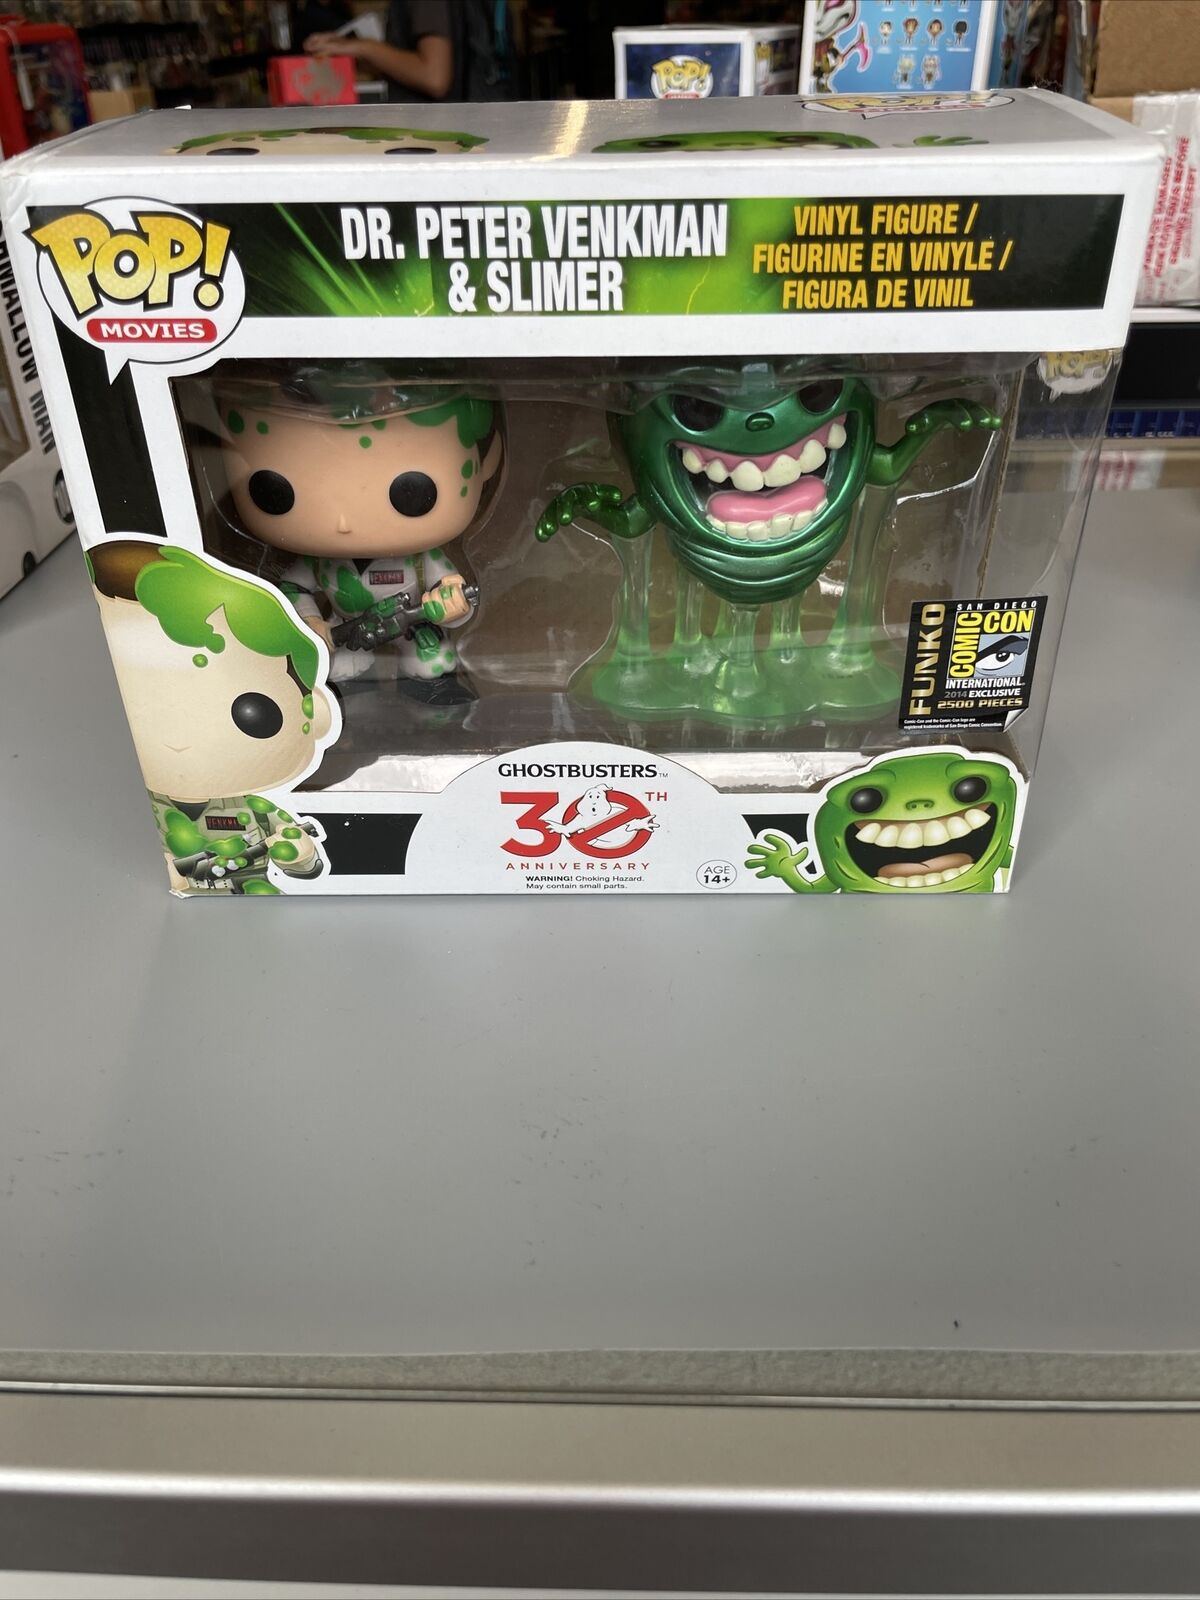 Ghostbusters SDCC 2014 exclusive Dr. Peter Venkman and Slimer 2 pack 